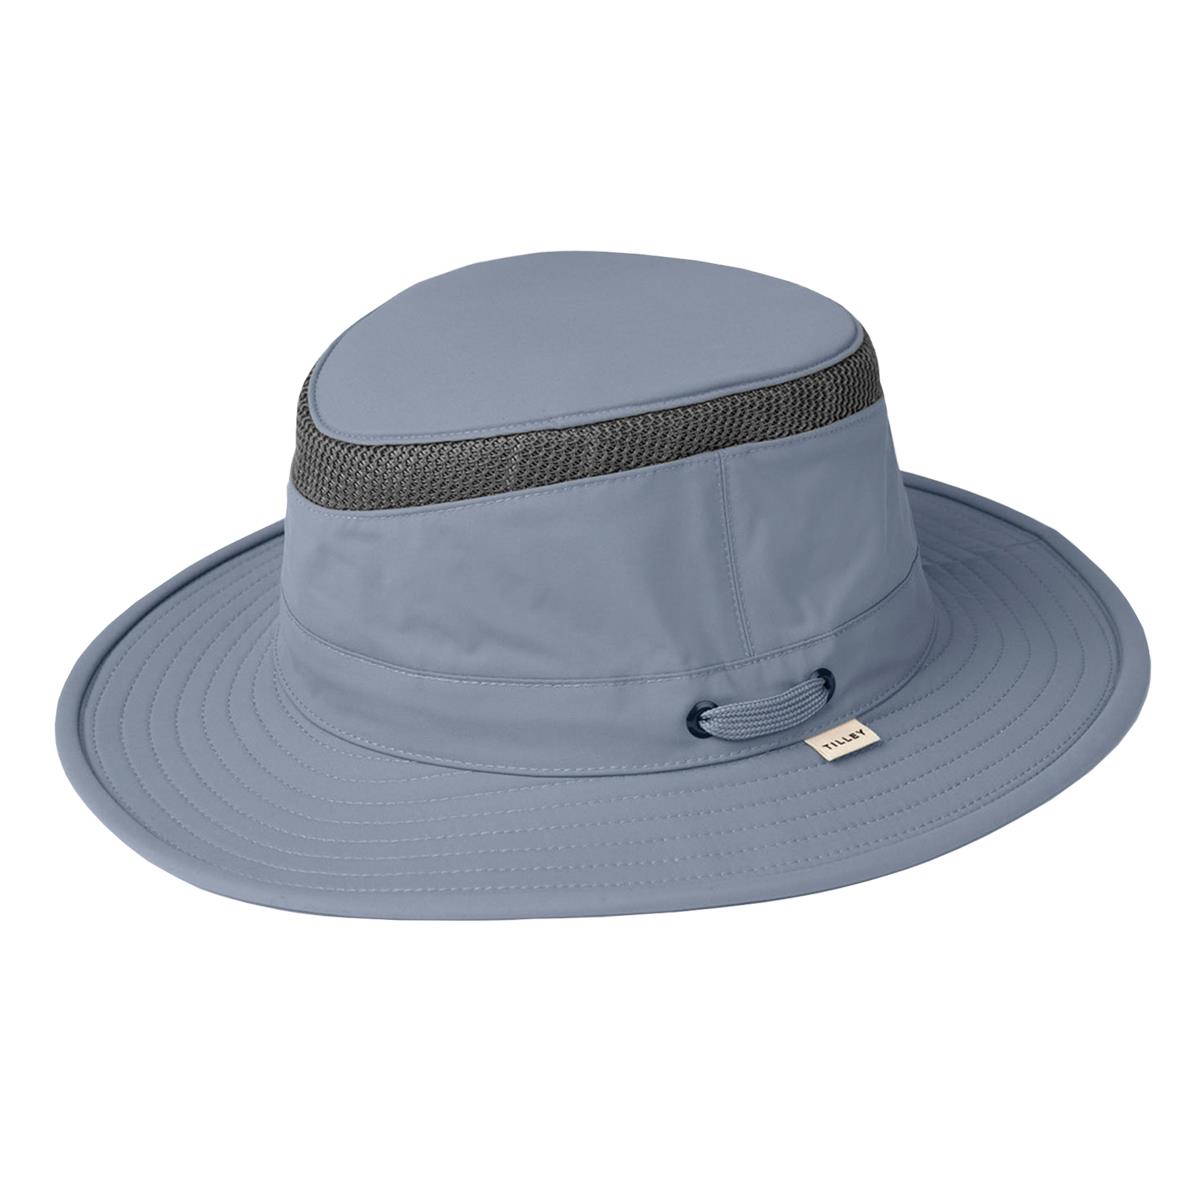 What features does the Tilley LTM5 hat have?